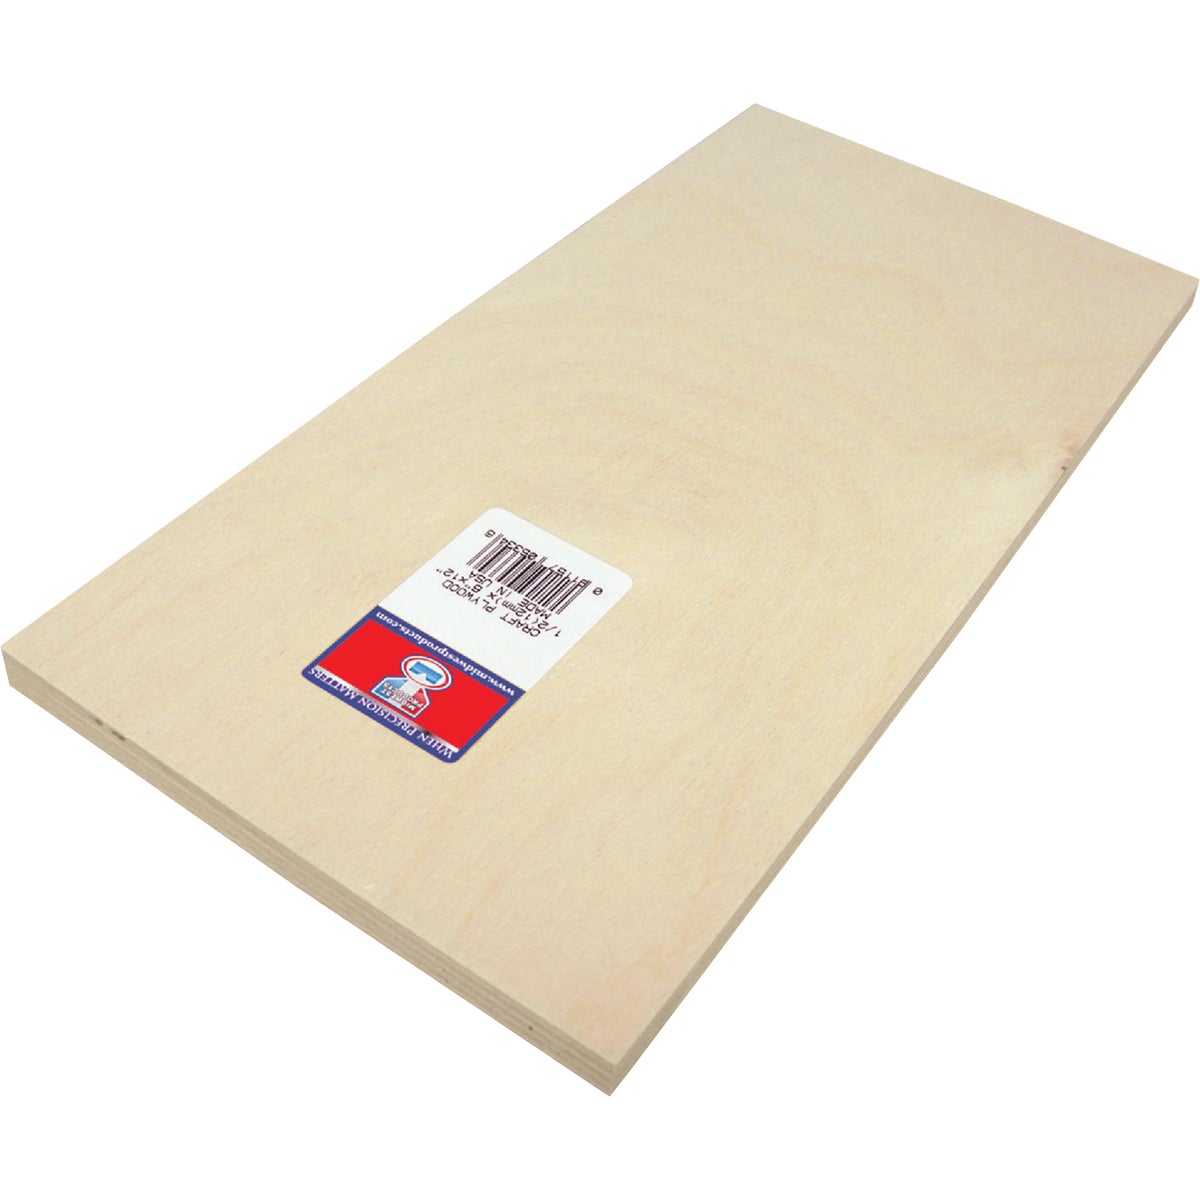 Midwest Products 1/2 In. x 6 In. x 12 In. Birch Plywood